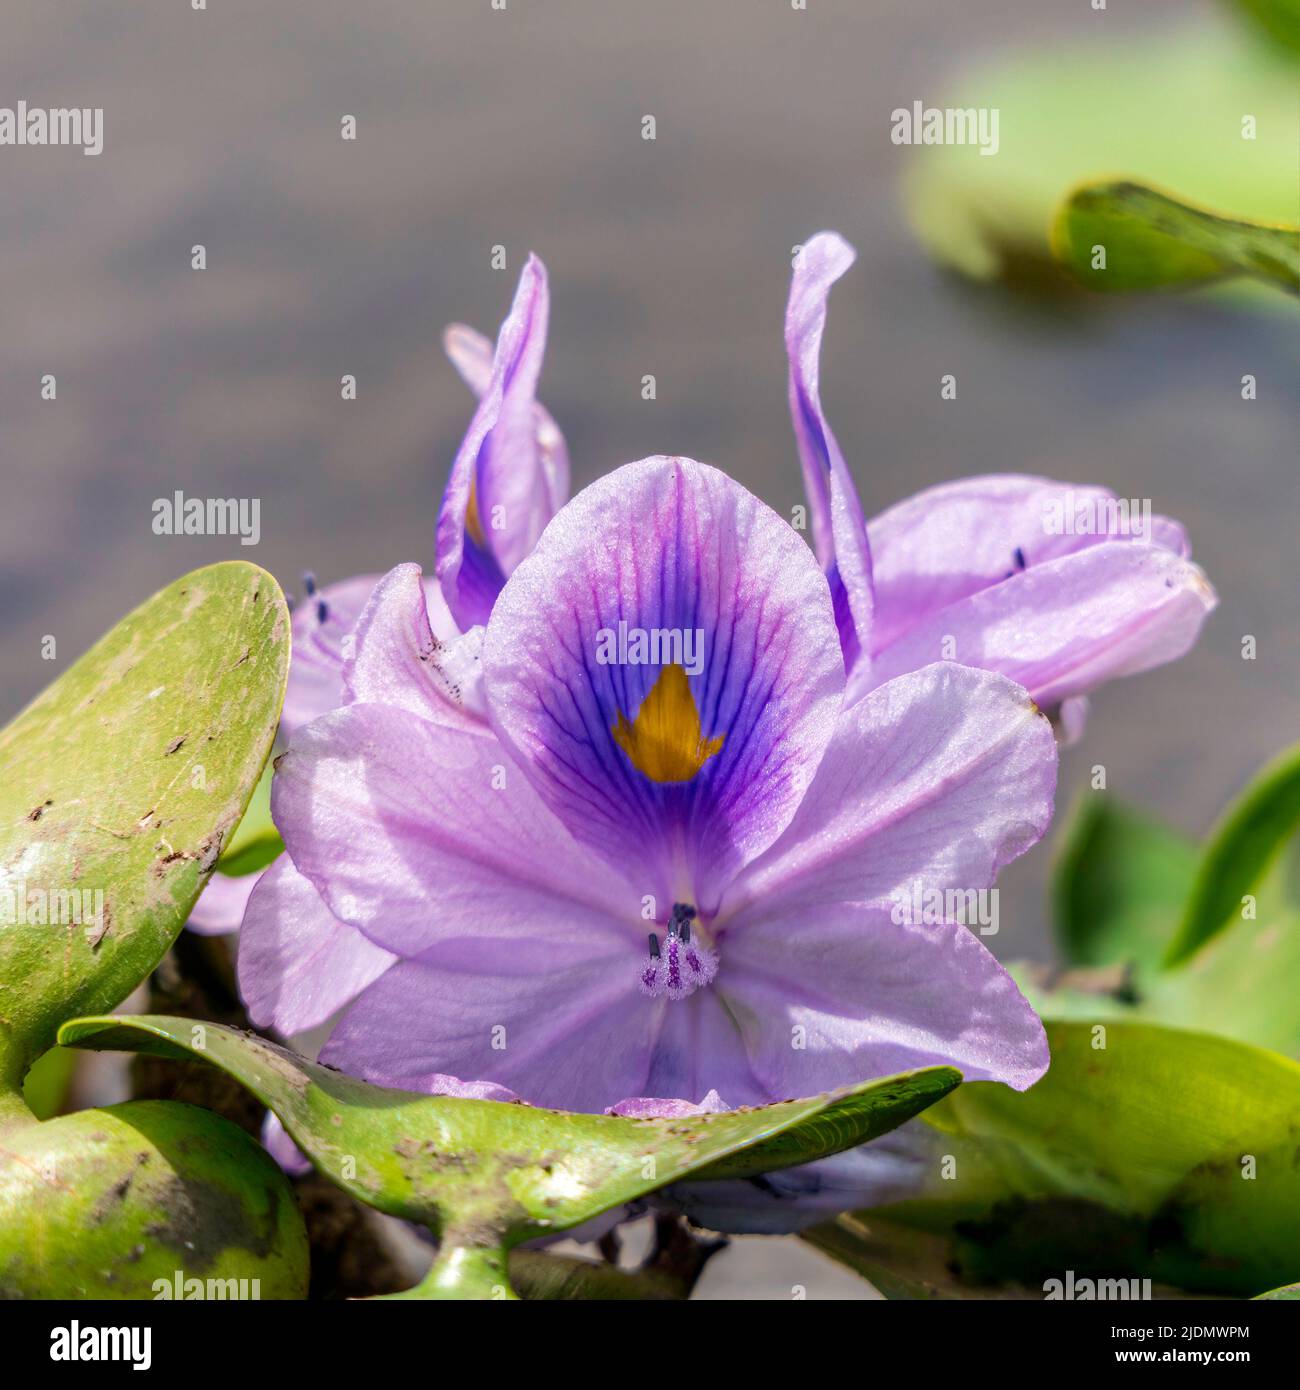 Eichhornia crassipes or common water hyacinth flower blossomed on the pond with wild grasses Stock Photo